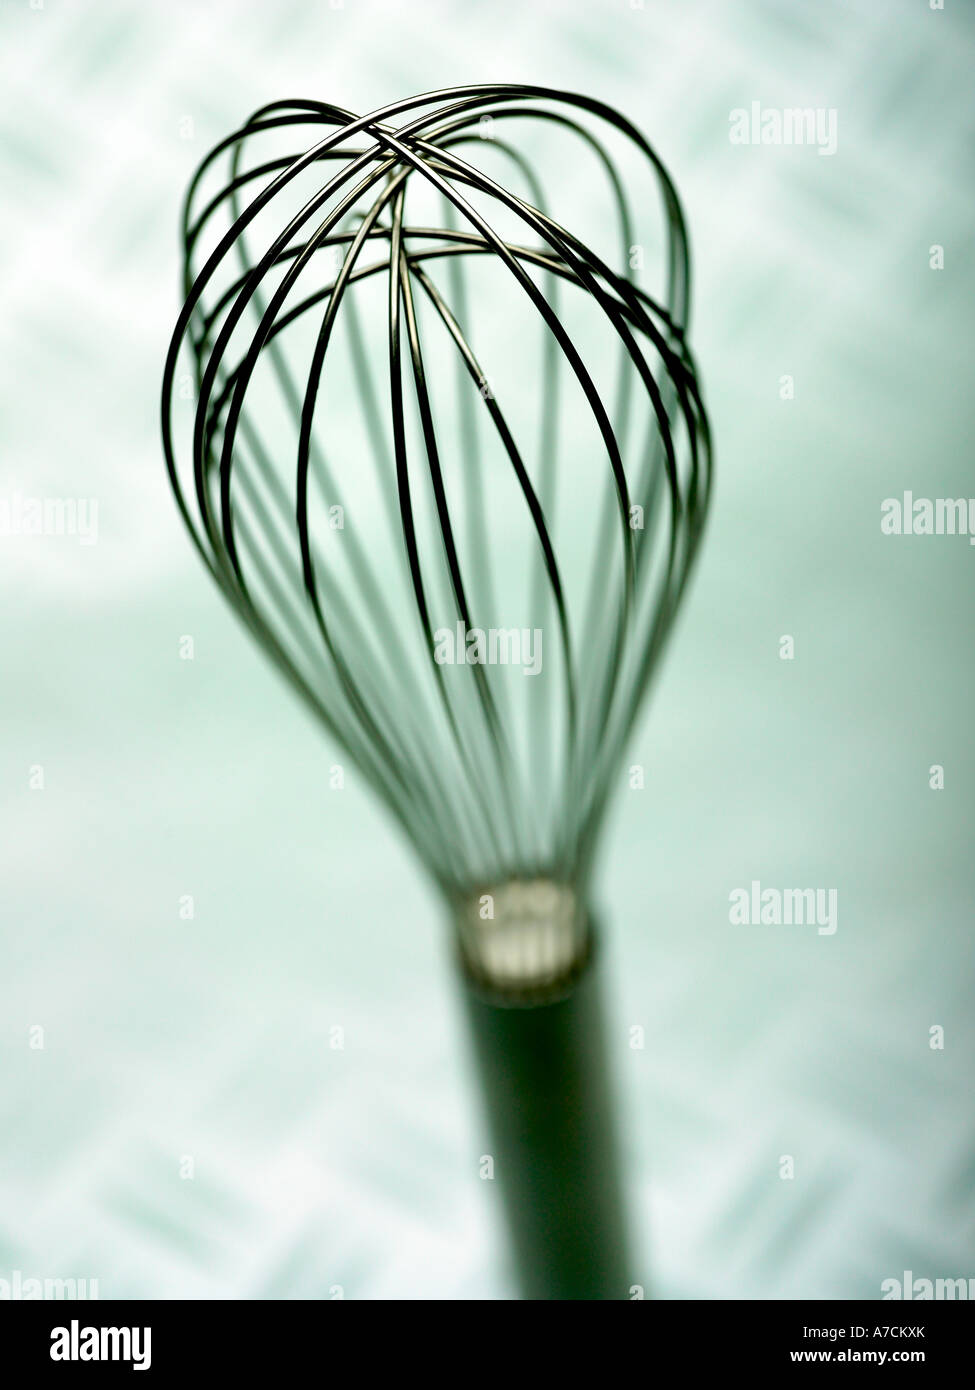 Tool Spotlight: Balloon Whisk - Cooking With Books